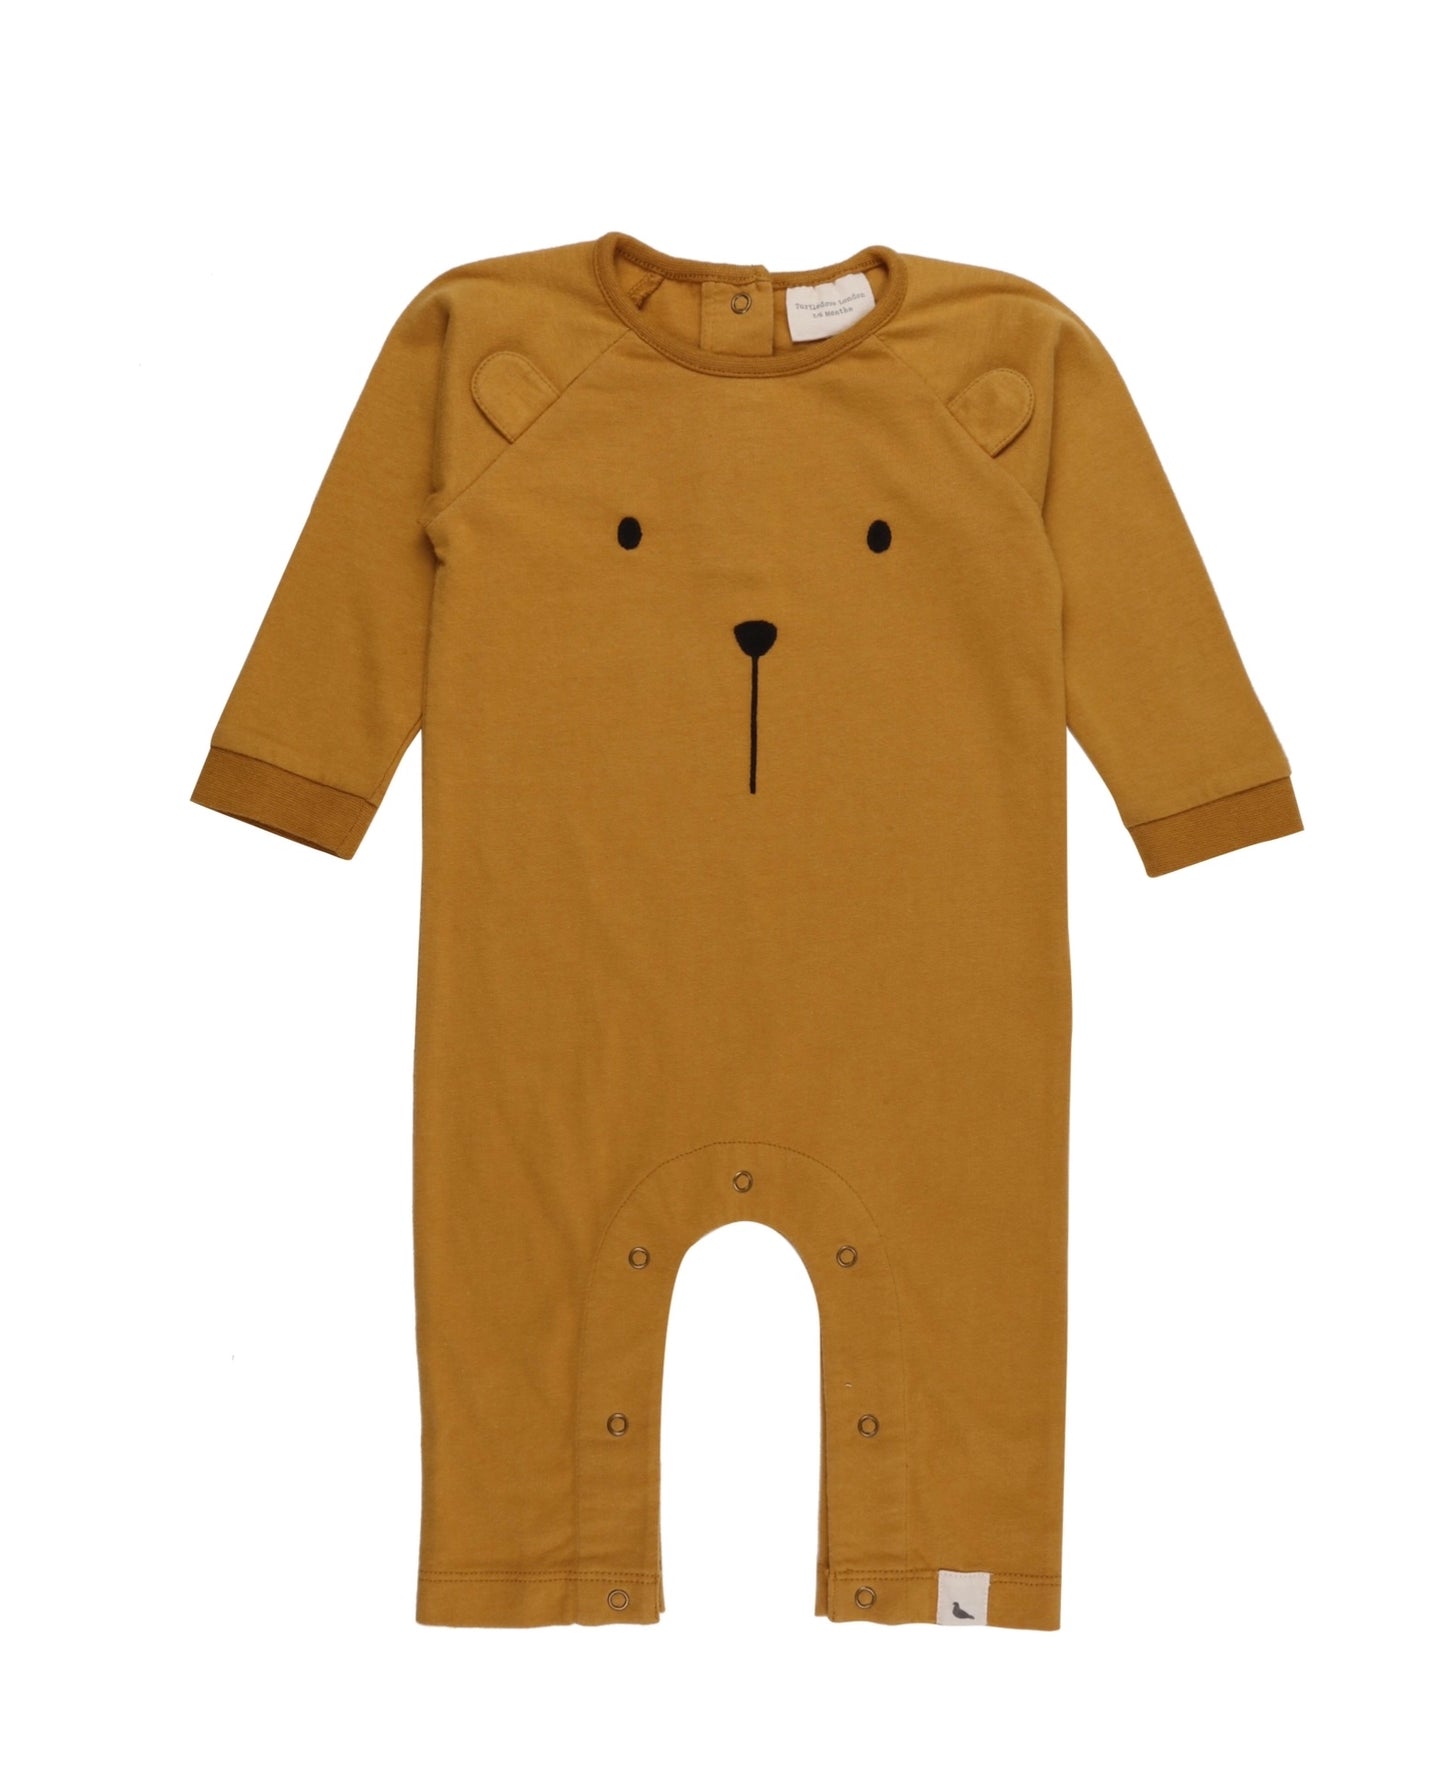 Load image into Gallery viewer, Turtledove London, Character Bear Face Baby Romper-Sunrise, Turtledove, Organics Kidswear, Turtledove Kidswear, Boys Clothes, Baby Girl Clothes, Newborn Gift, Nottinghamshire Stockist, Independent Kids Brand
